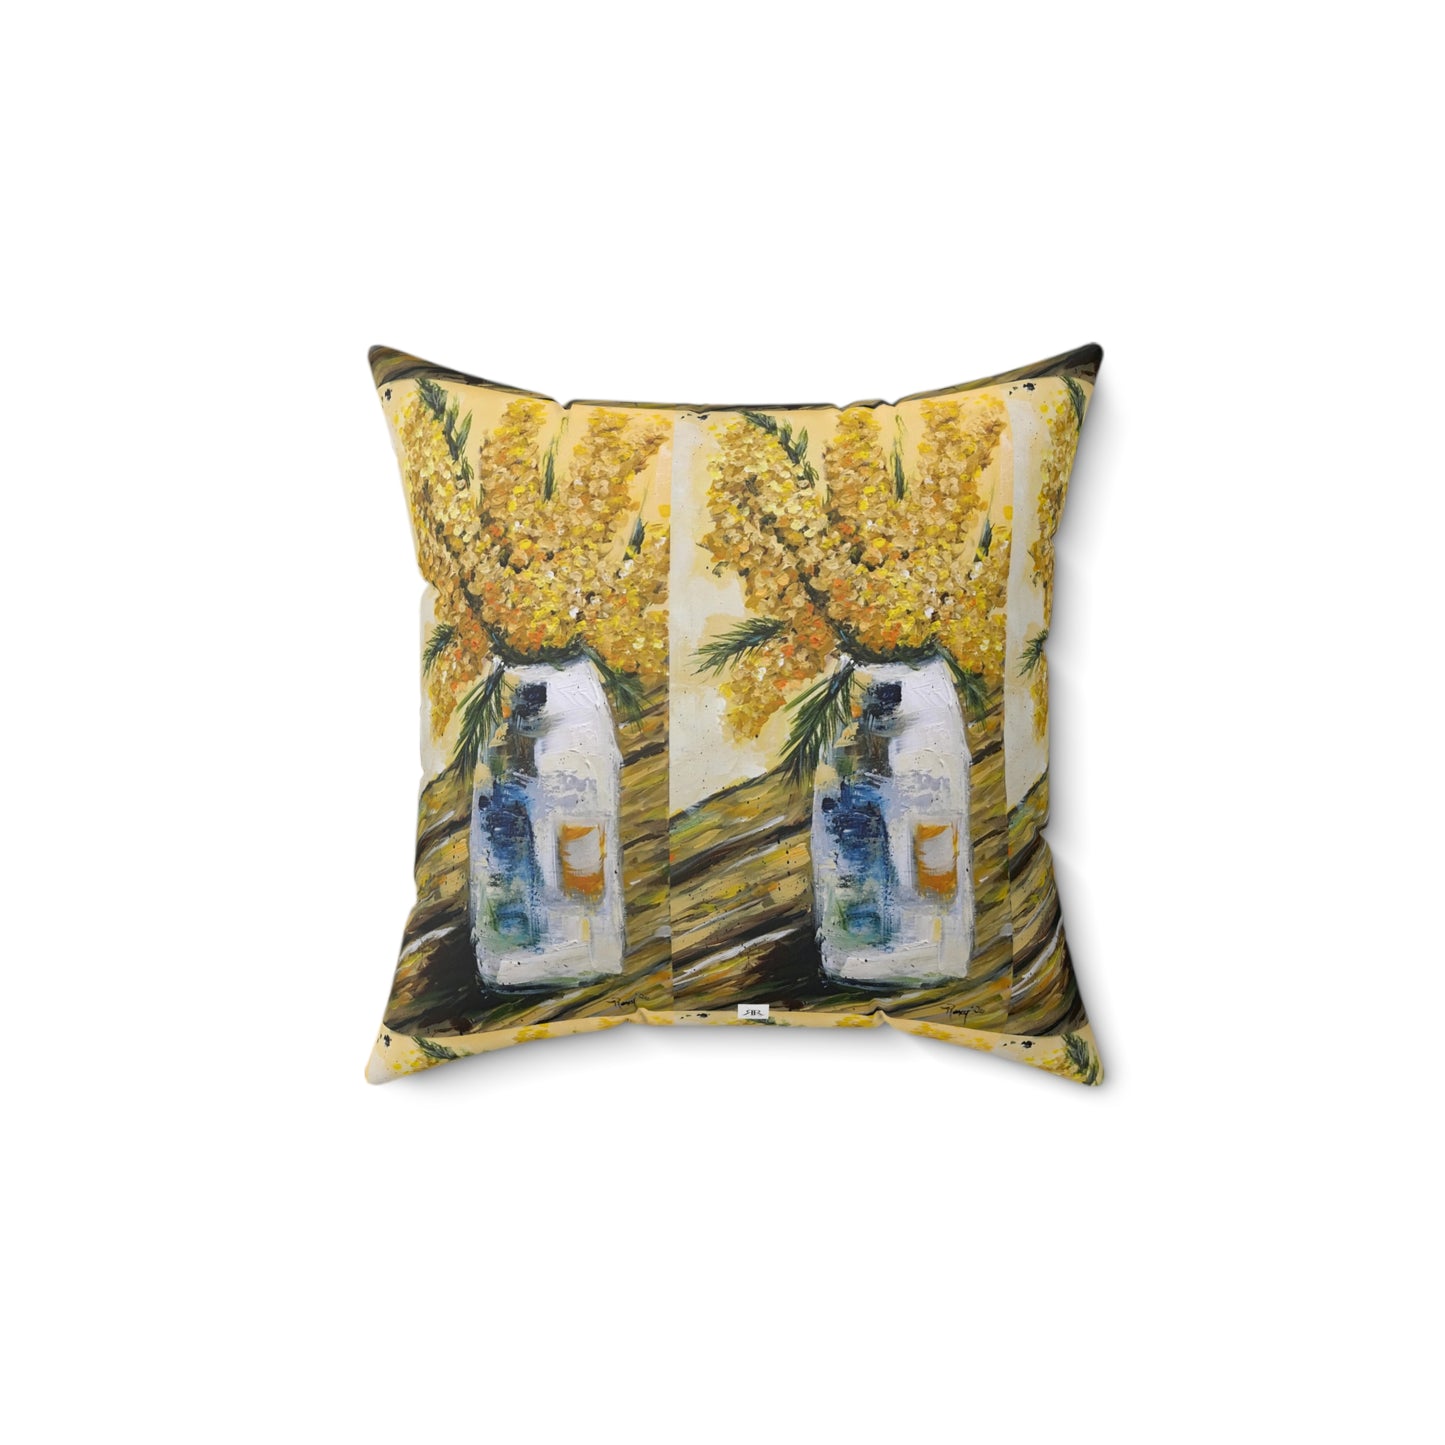 Goldenrod on the Picnic Table Indoor Spun Polyester Square Pillow